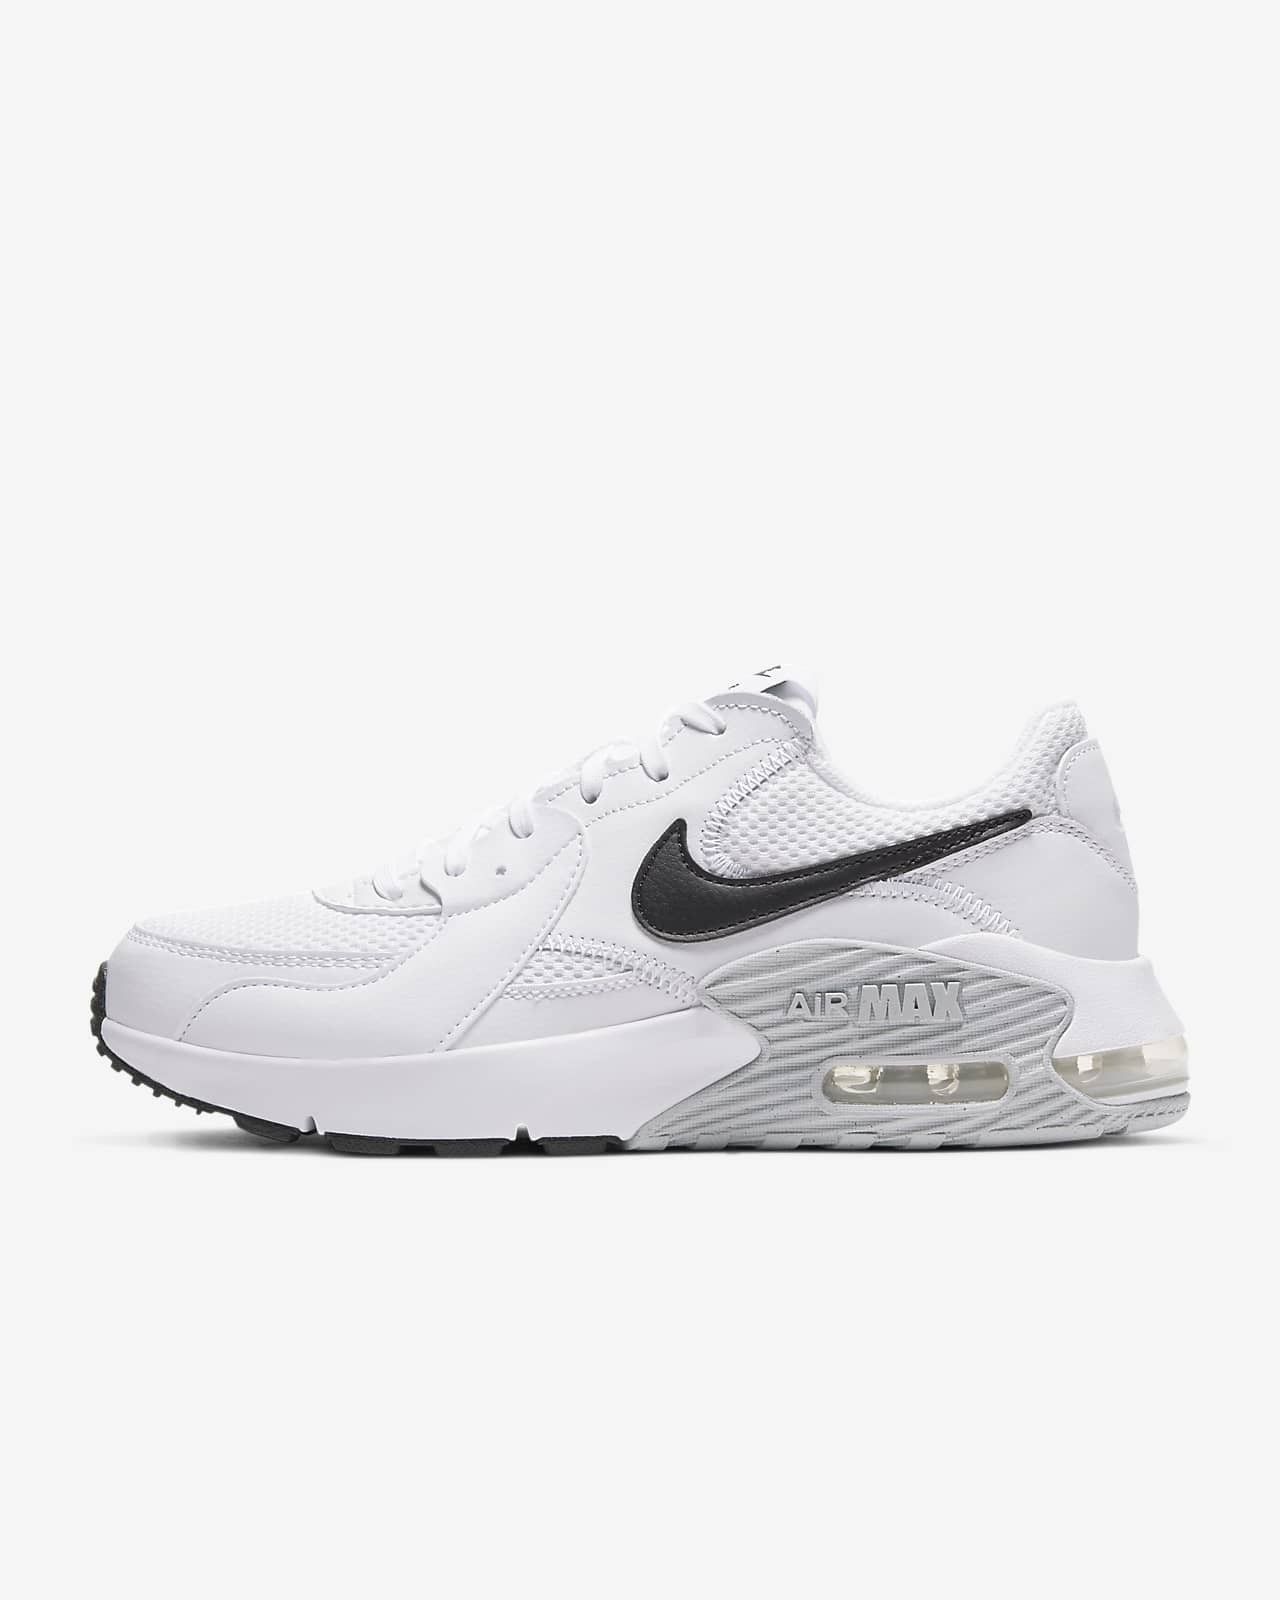 Nike Air Max, Activewear, Sneakers, White Sneakers, Athleisure, Nike, Activewear Sneakers | Nike (US)